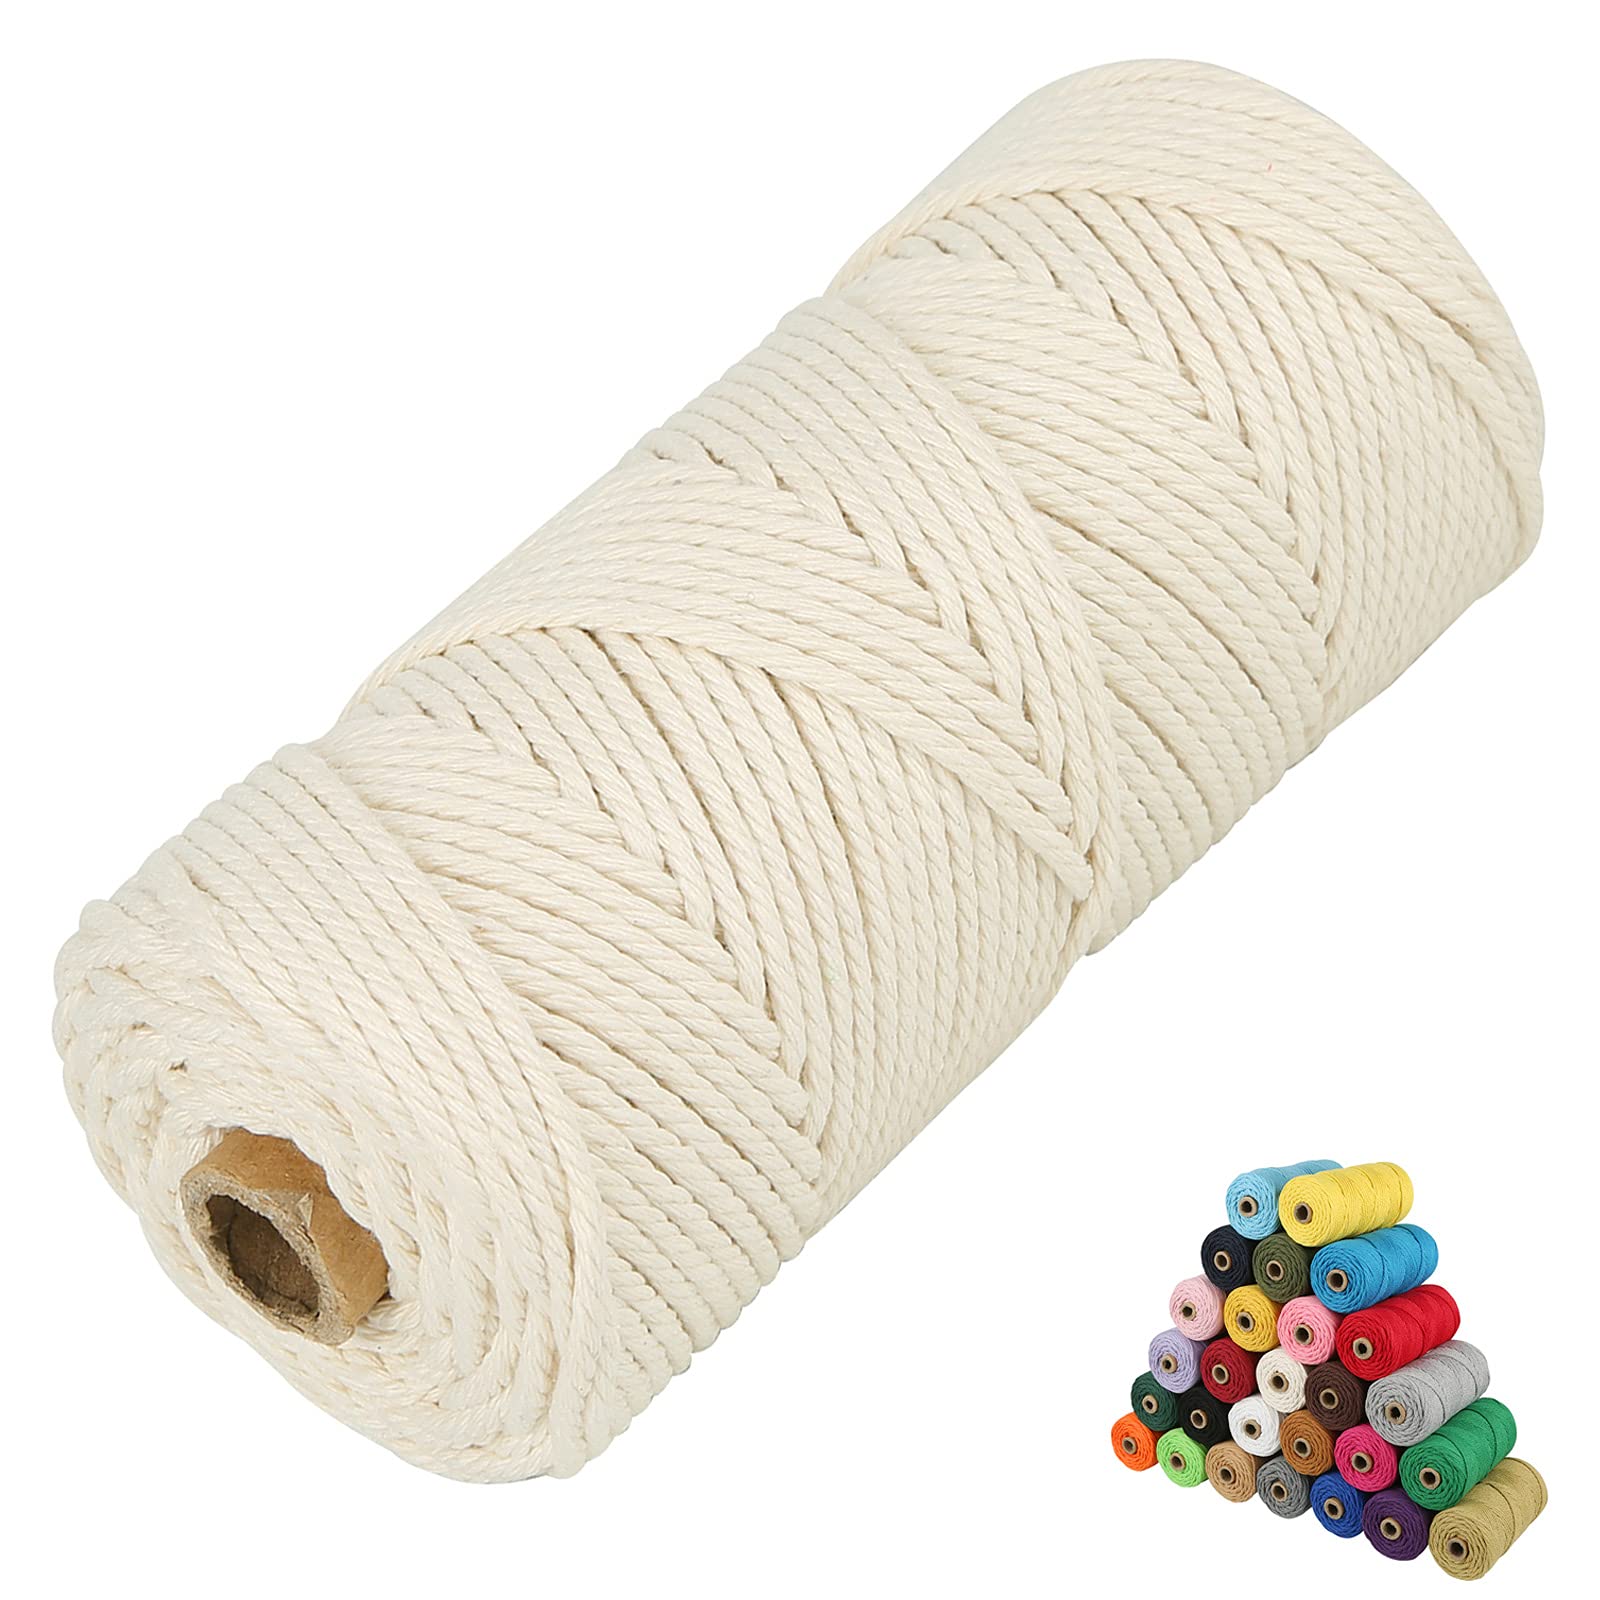 45 Color Options Macrame Cord 2mm/3mm/4mm/5mm/6mmx109 Yards